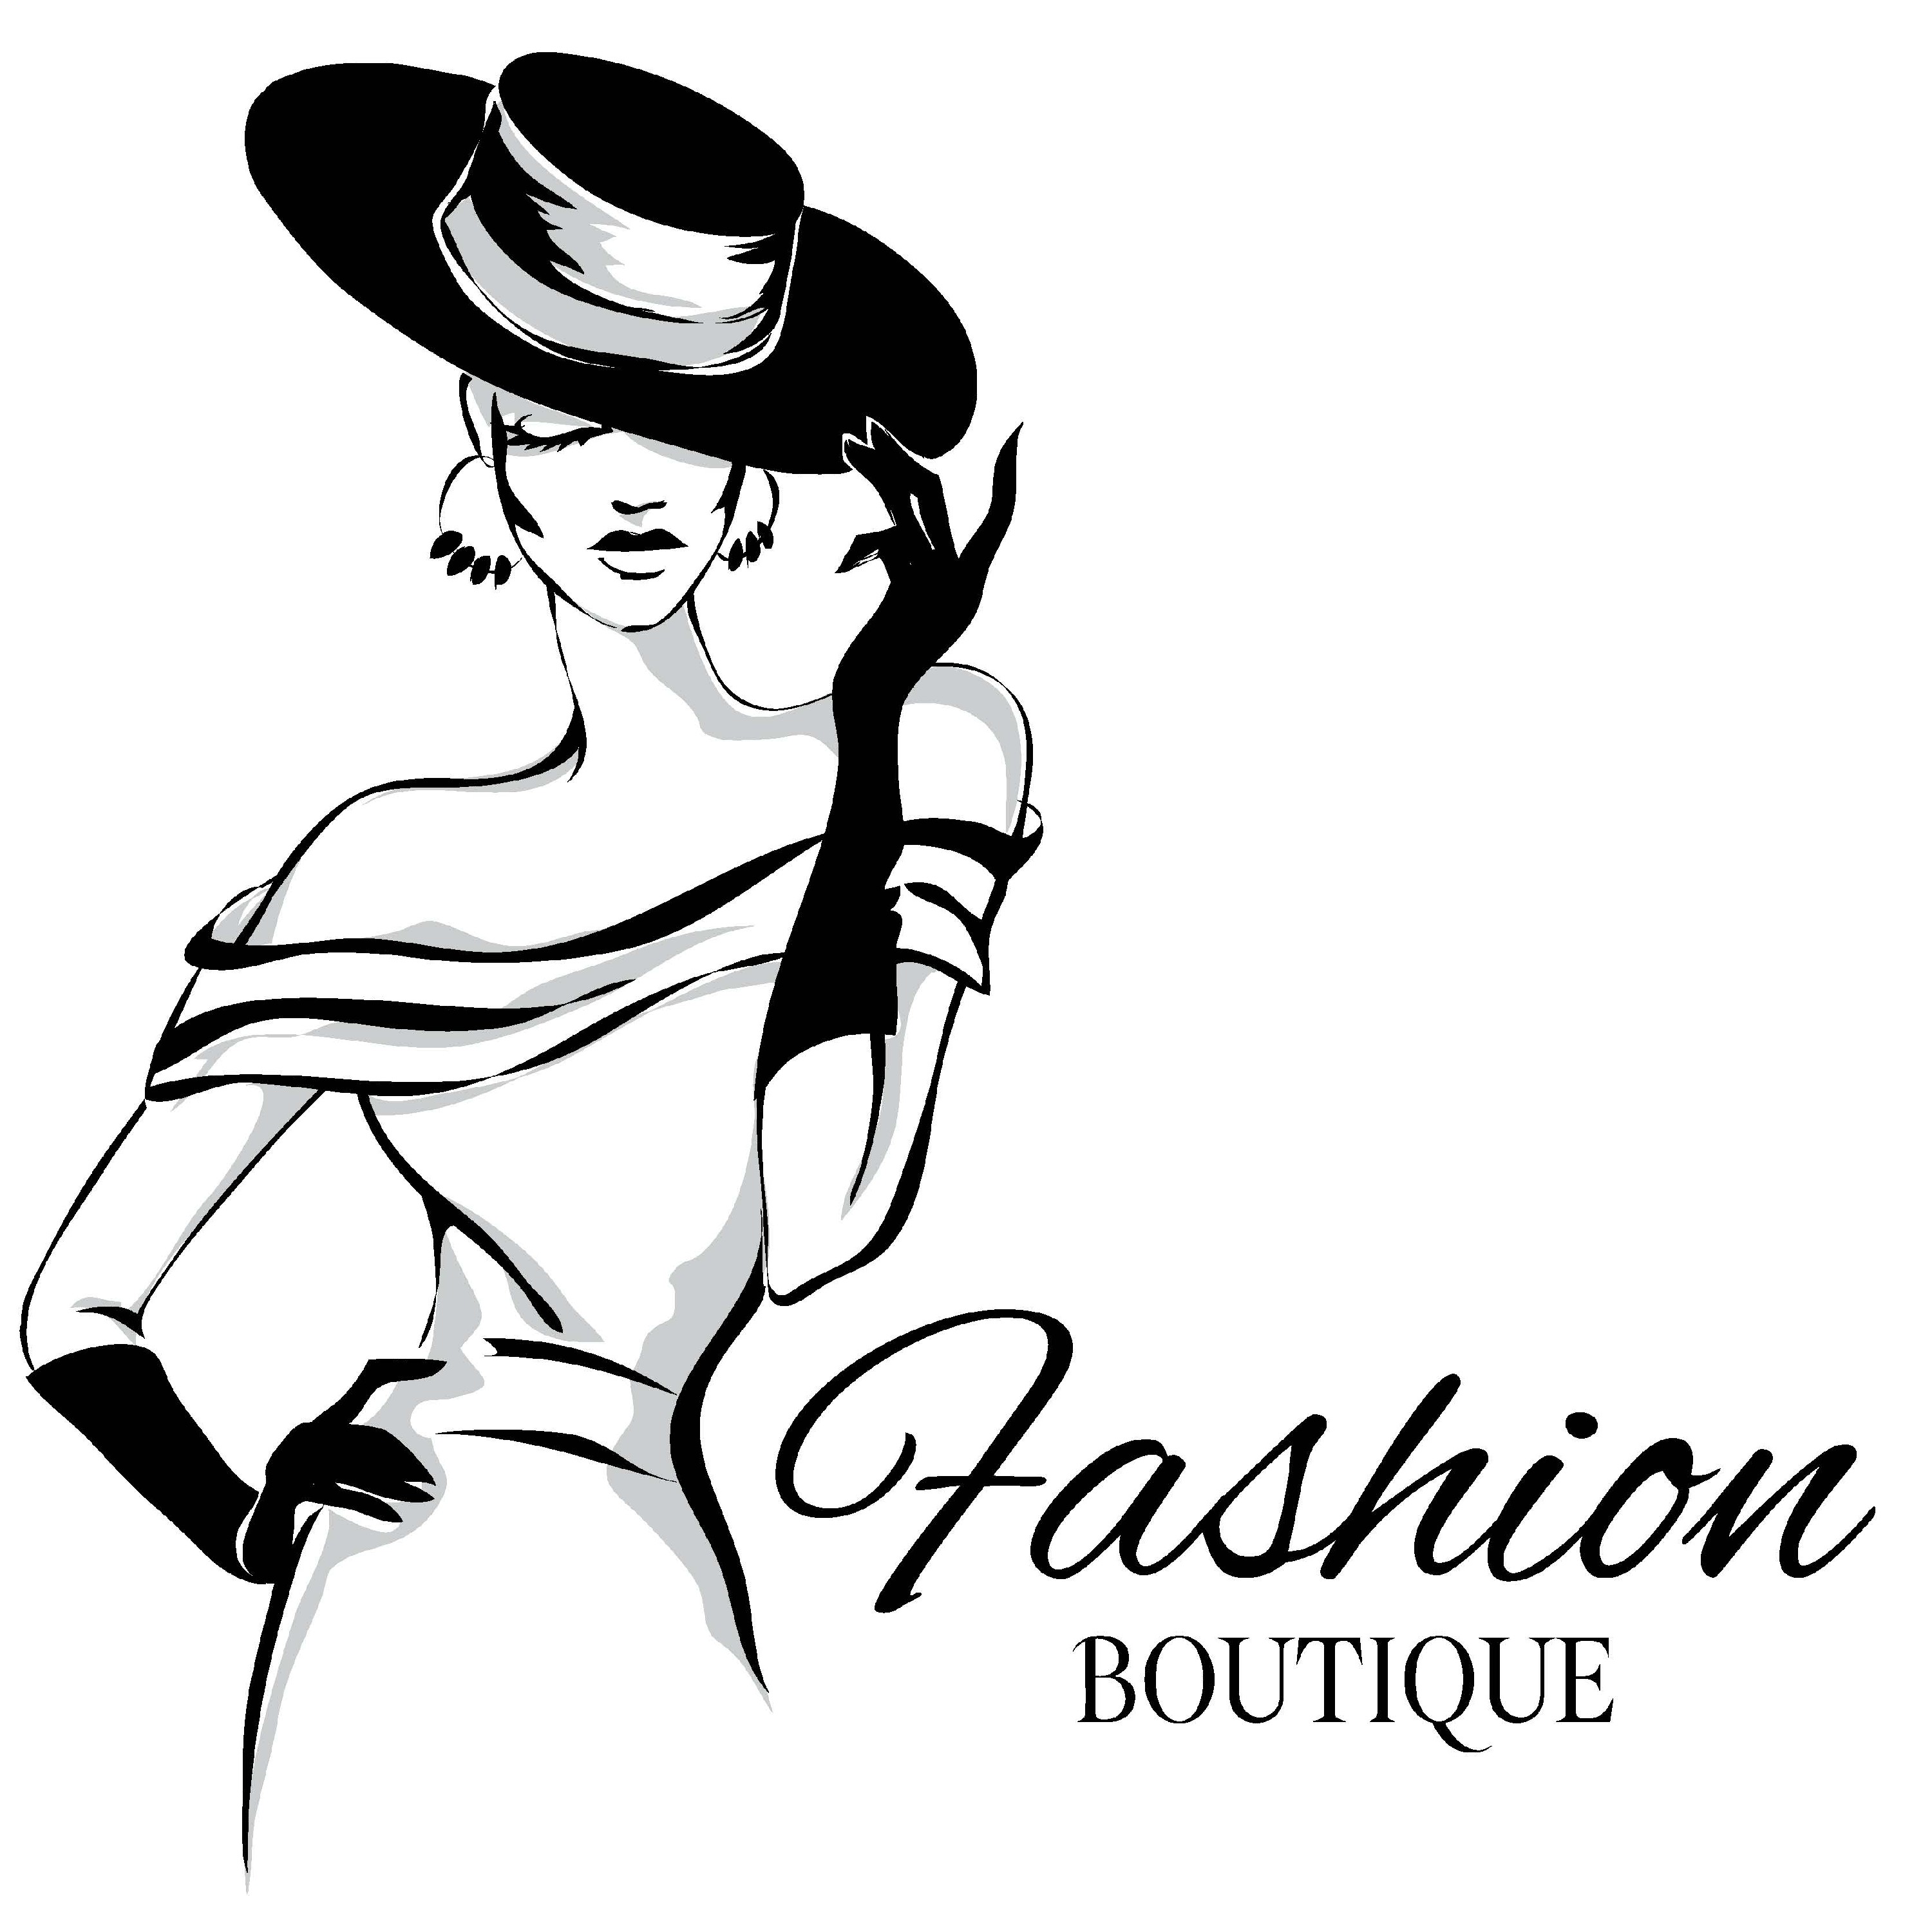 Women's Retail Fashion Boutique in the Eastern...Business For Sale